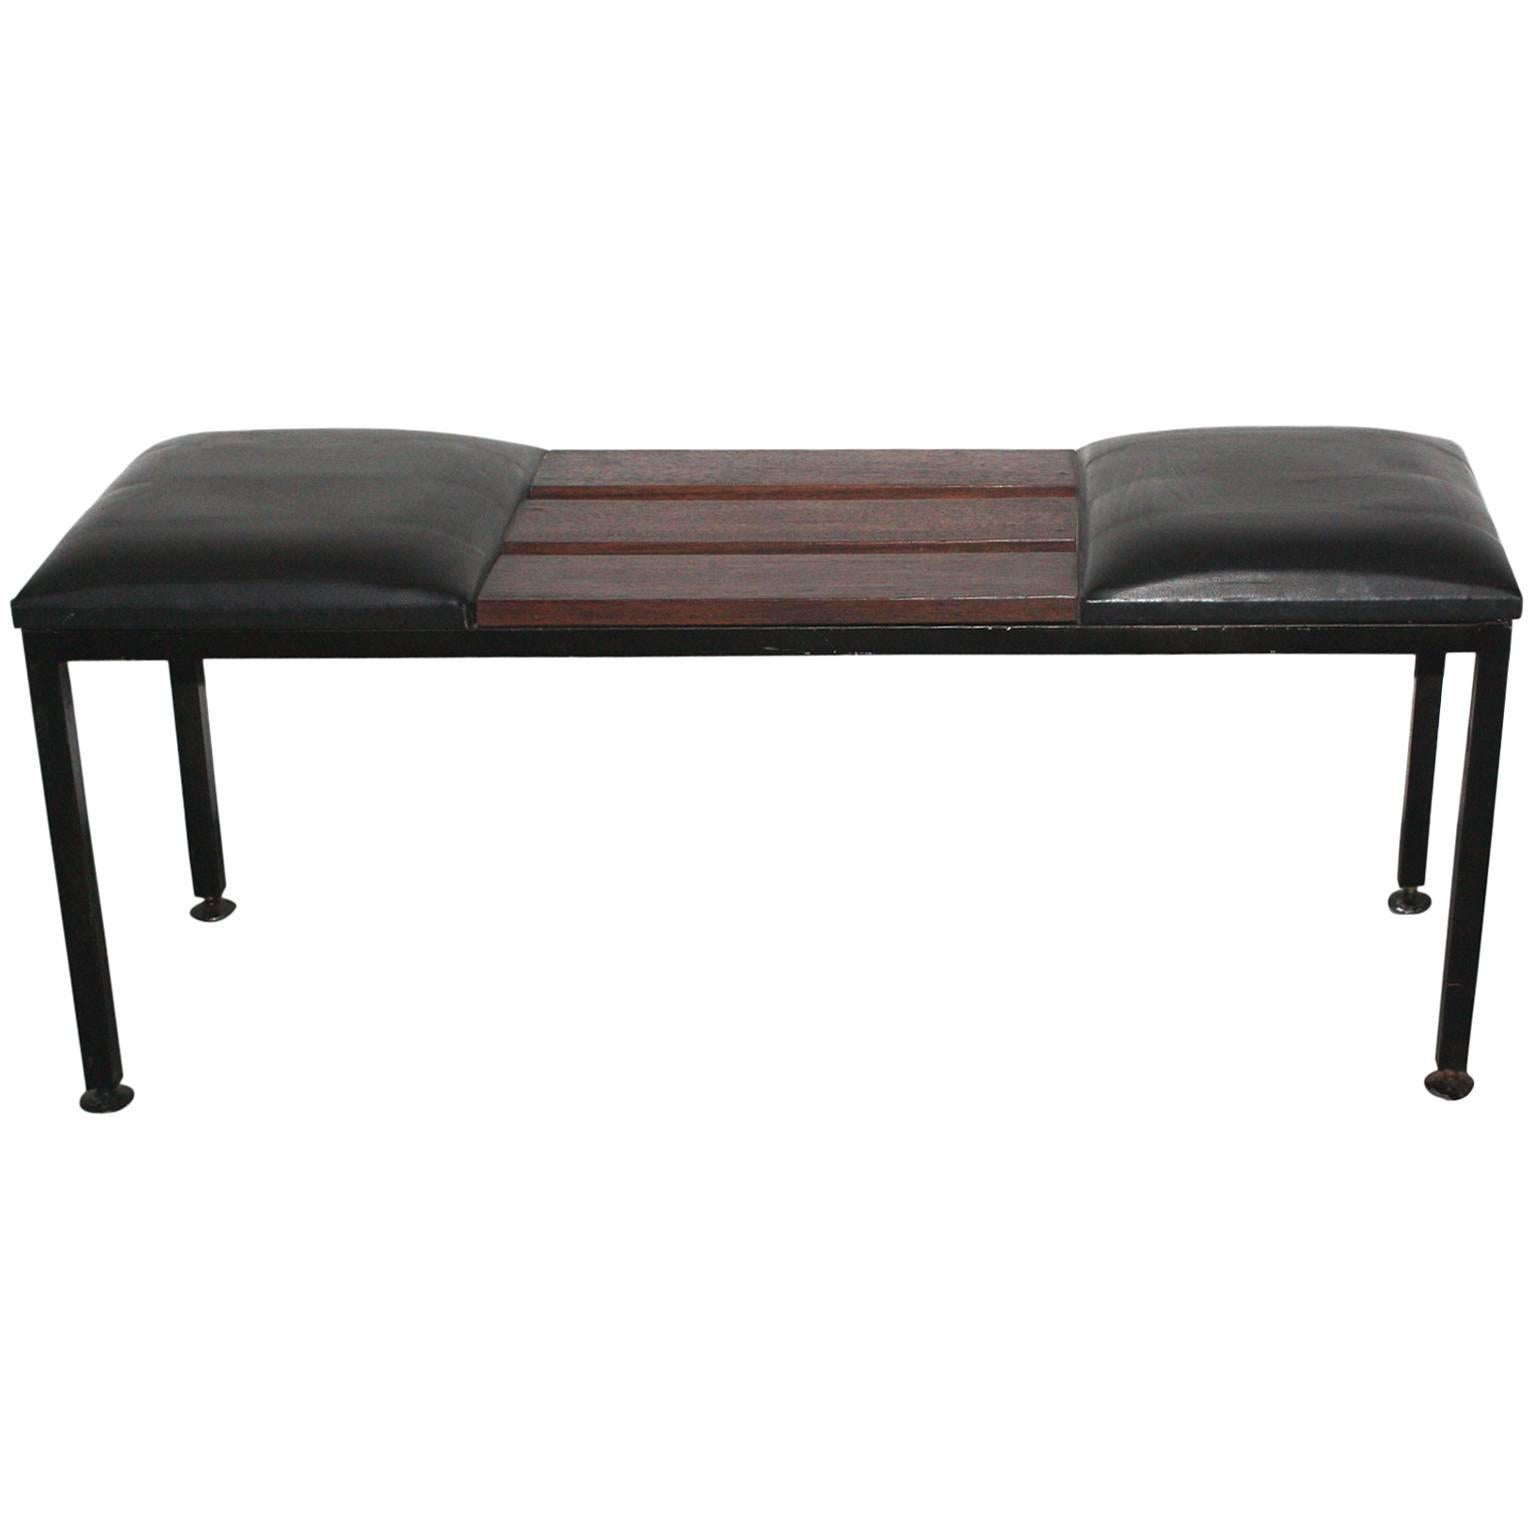 1950s Italian Bench in Metal, Leather and Wood For Sale